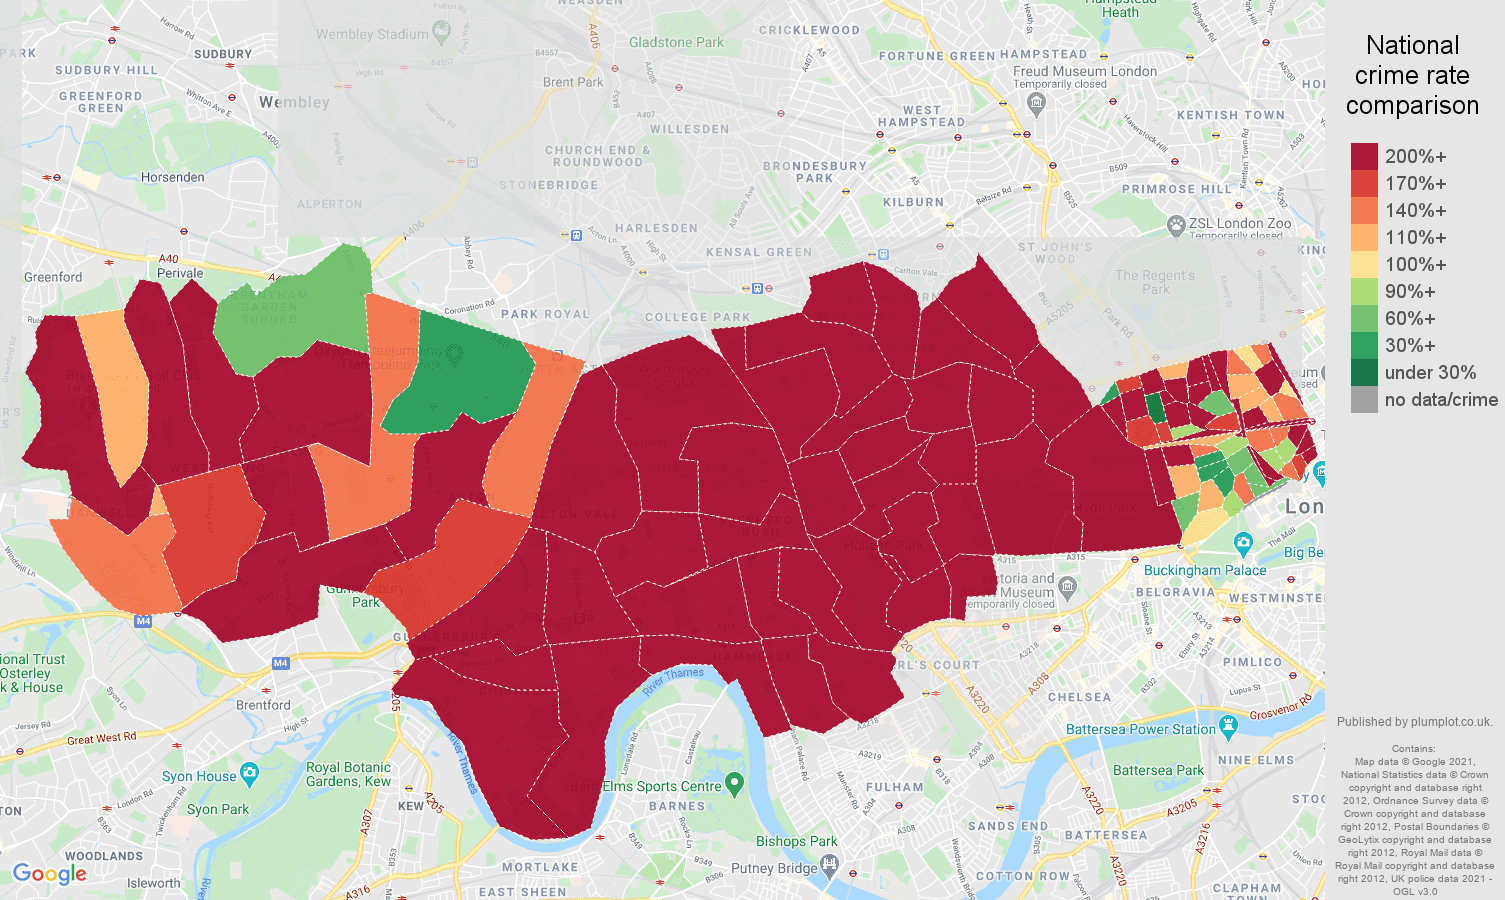 West London bicycle theft crime rate comparison map